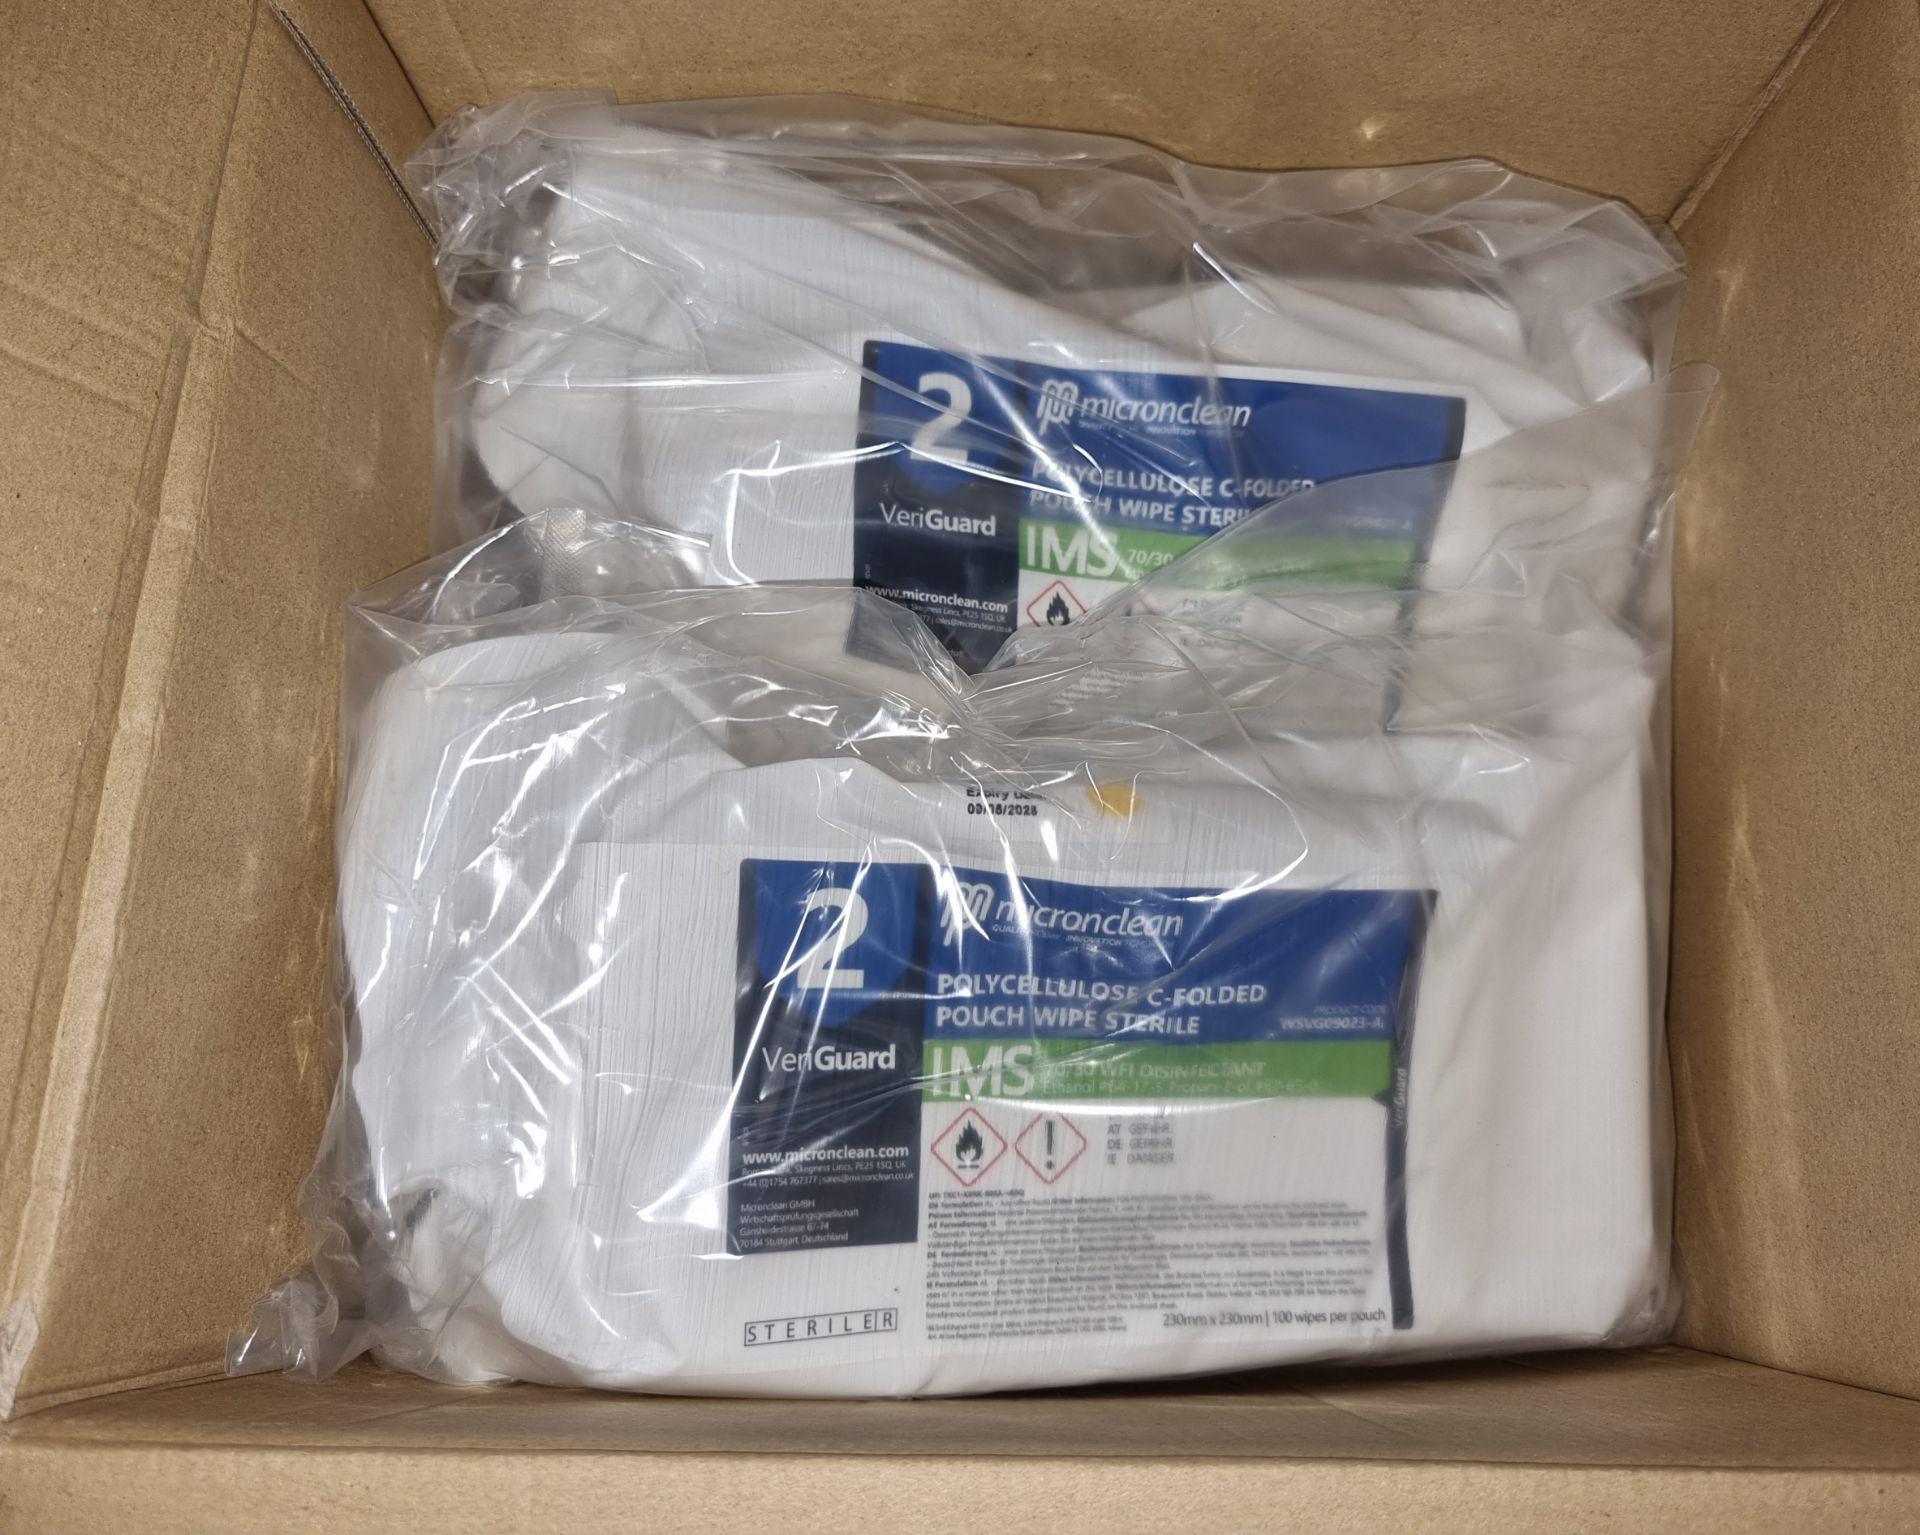 33x boxes of Micronclean Veriguard Polycellulose C-folded pouch wipe sterile - 230mm x 230mm - Image 3 of 4